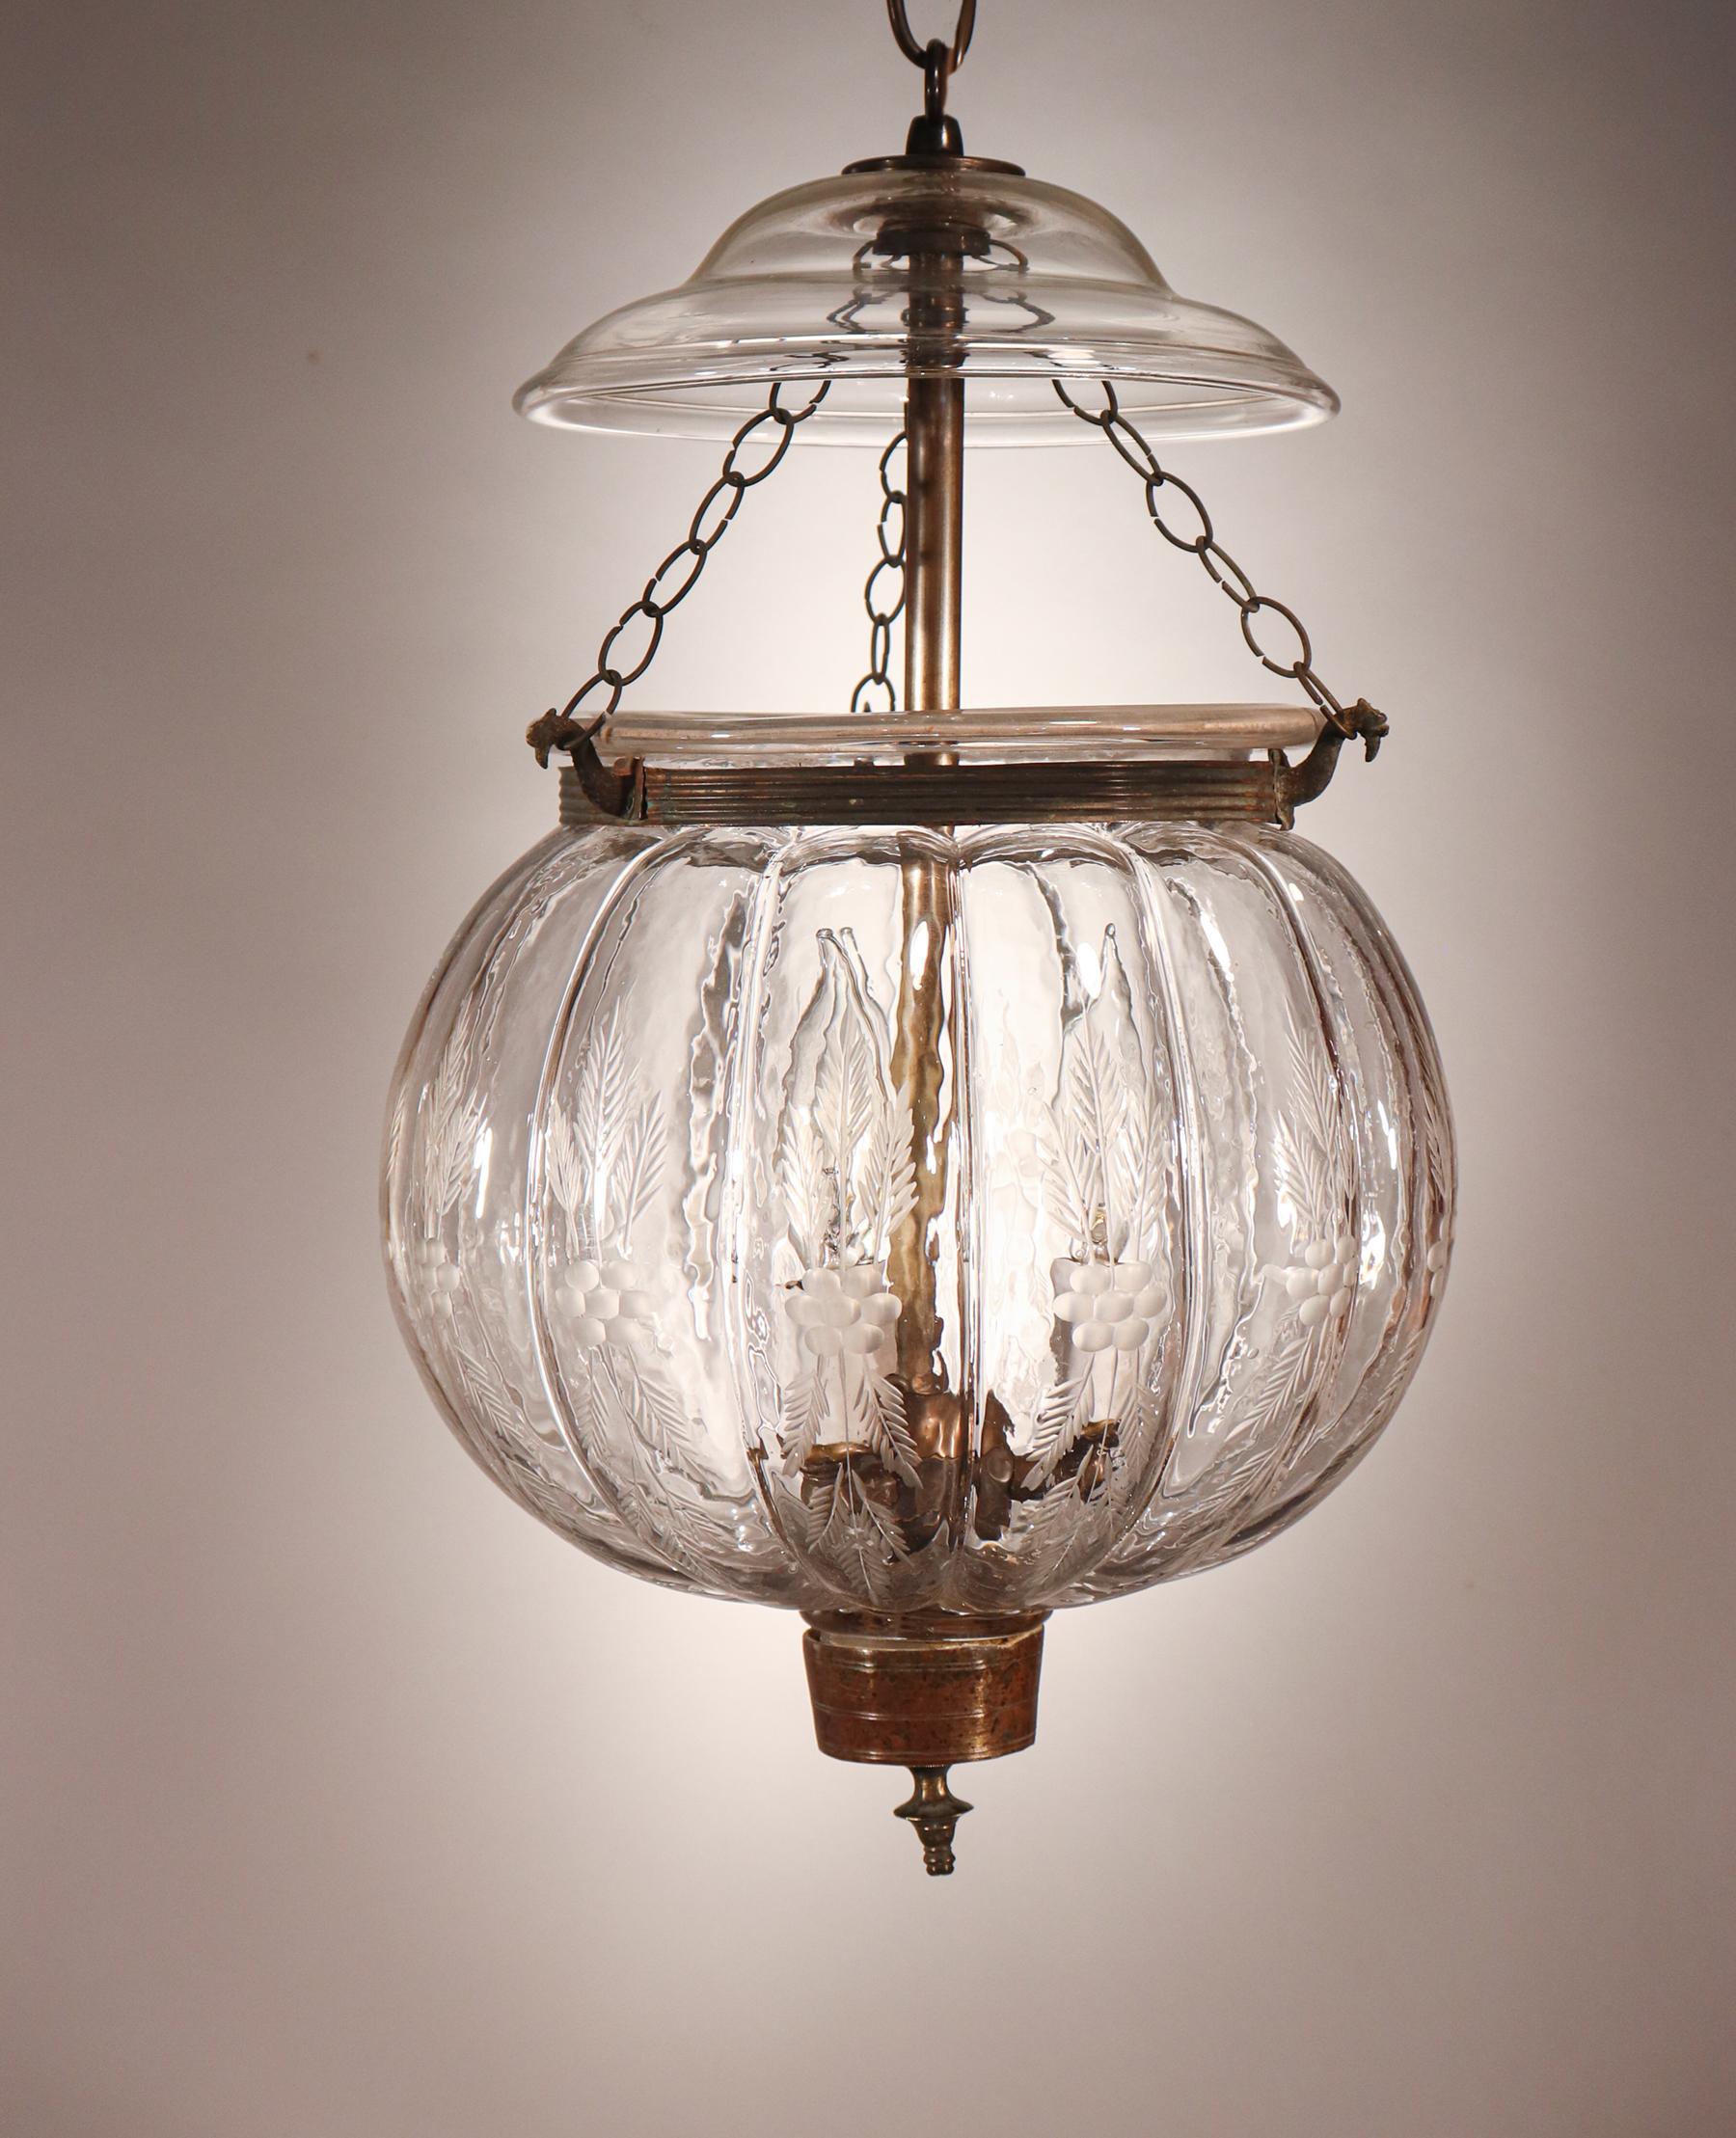 An antique Belgian melon or pumpkin-shaped bell jar lantern with an etched wheat motif, circa 1890. This authentic lantern features excellent quality hand blown glass, as well as its original smoke bell/lid, rolled brass band and finial/candle